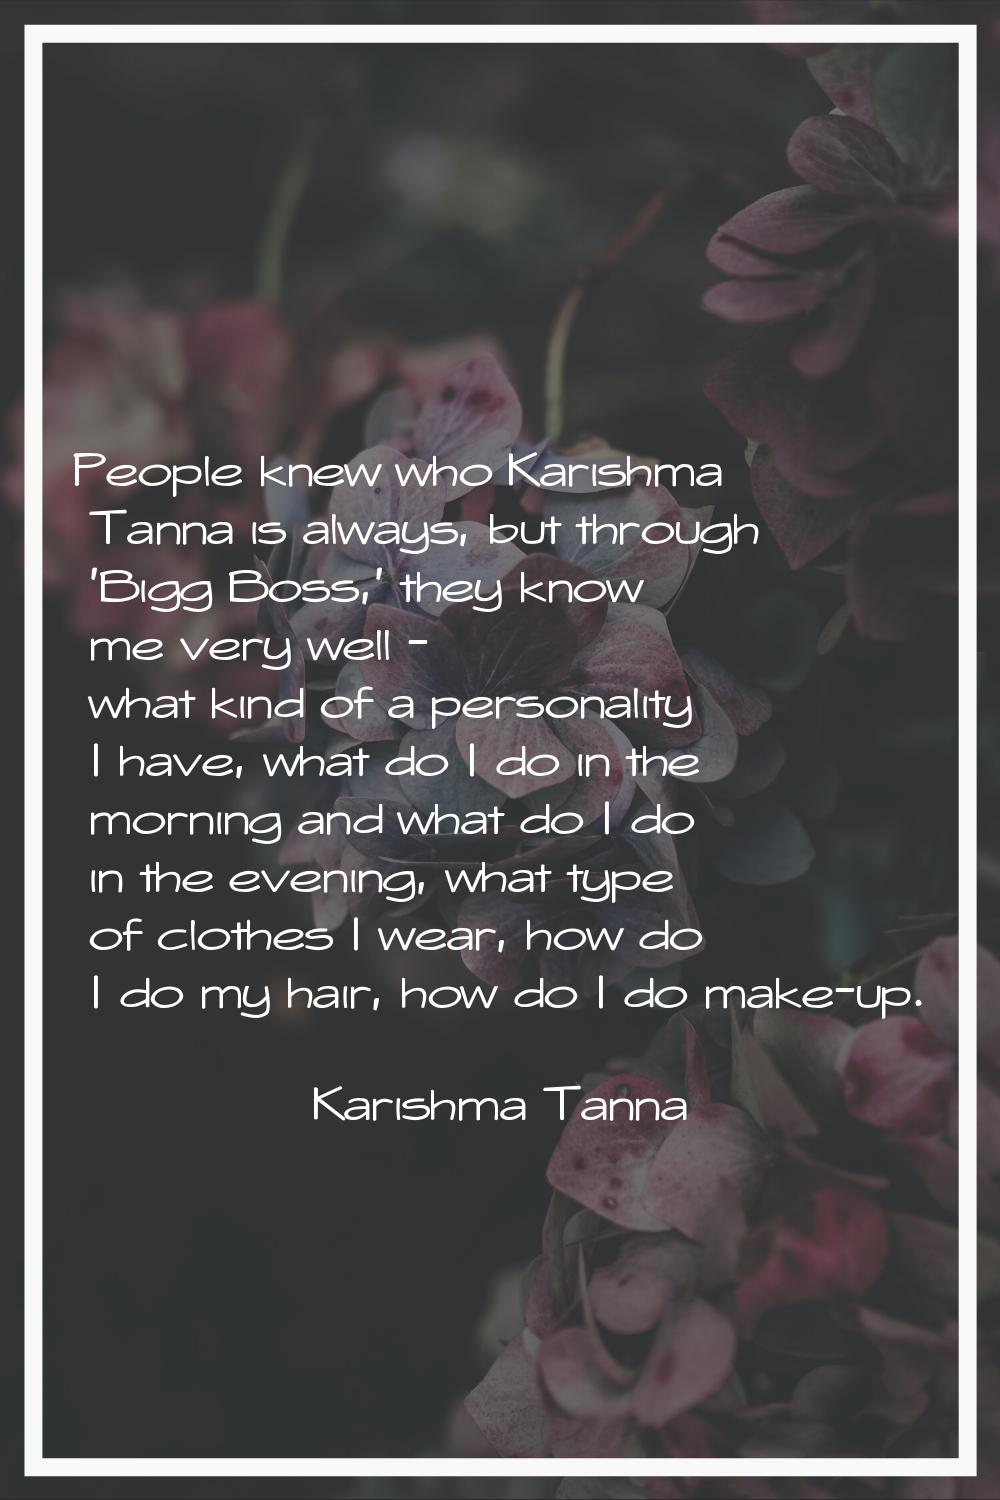 People knew who Karishma Tanna is always, but through 'Bigg Boss,' they know me very well - what ki